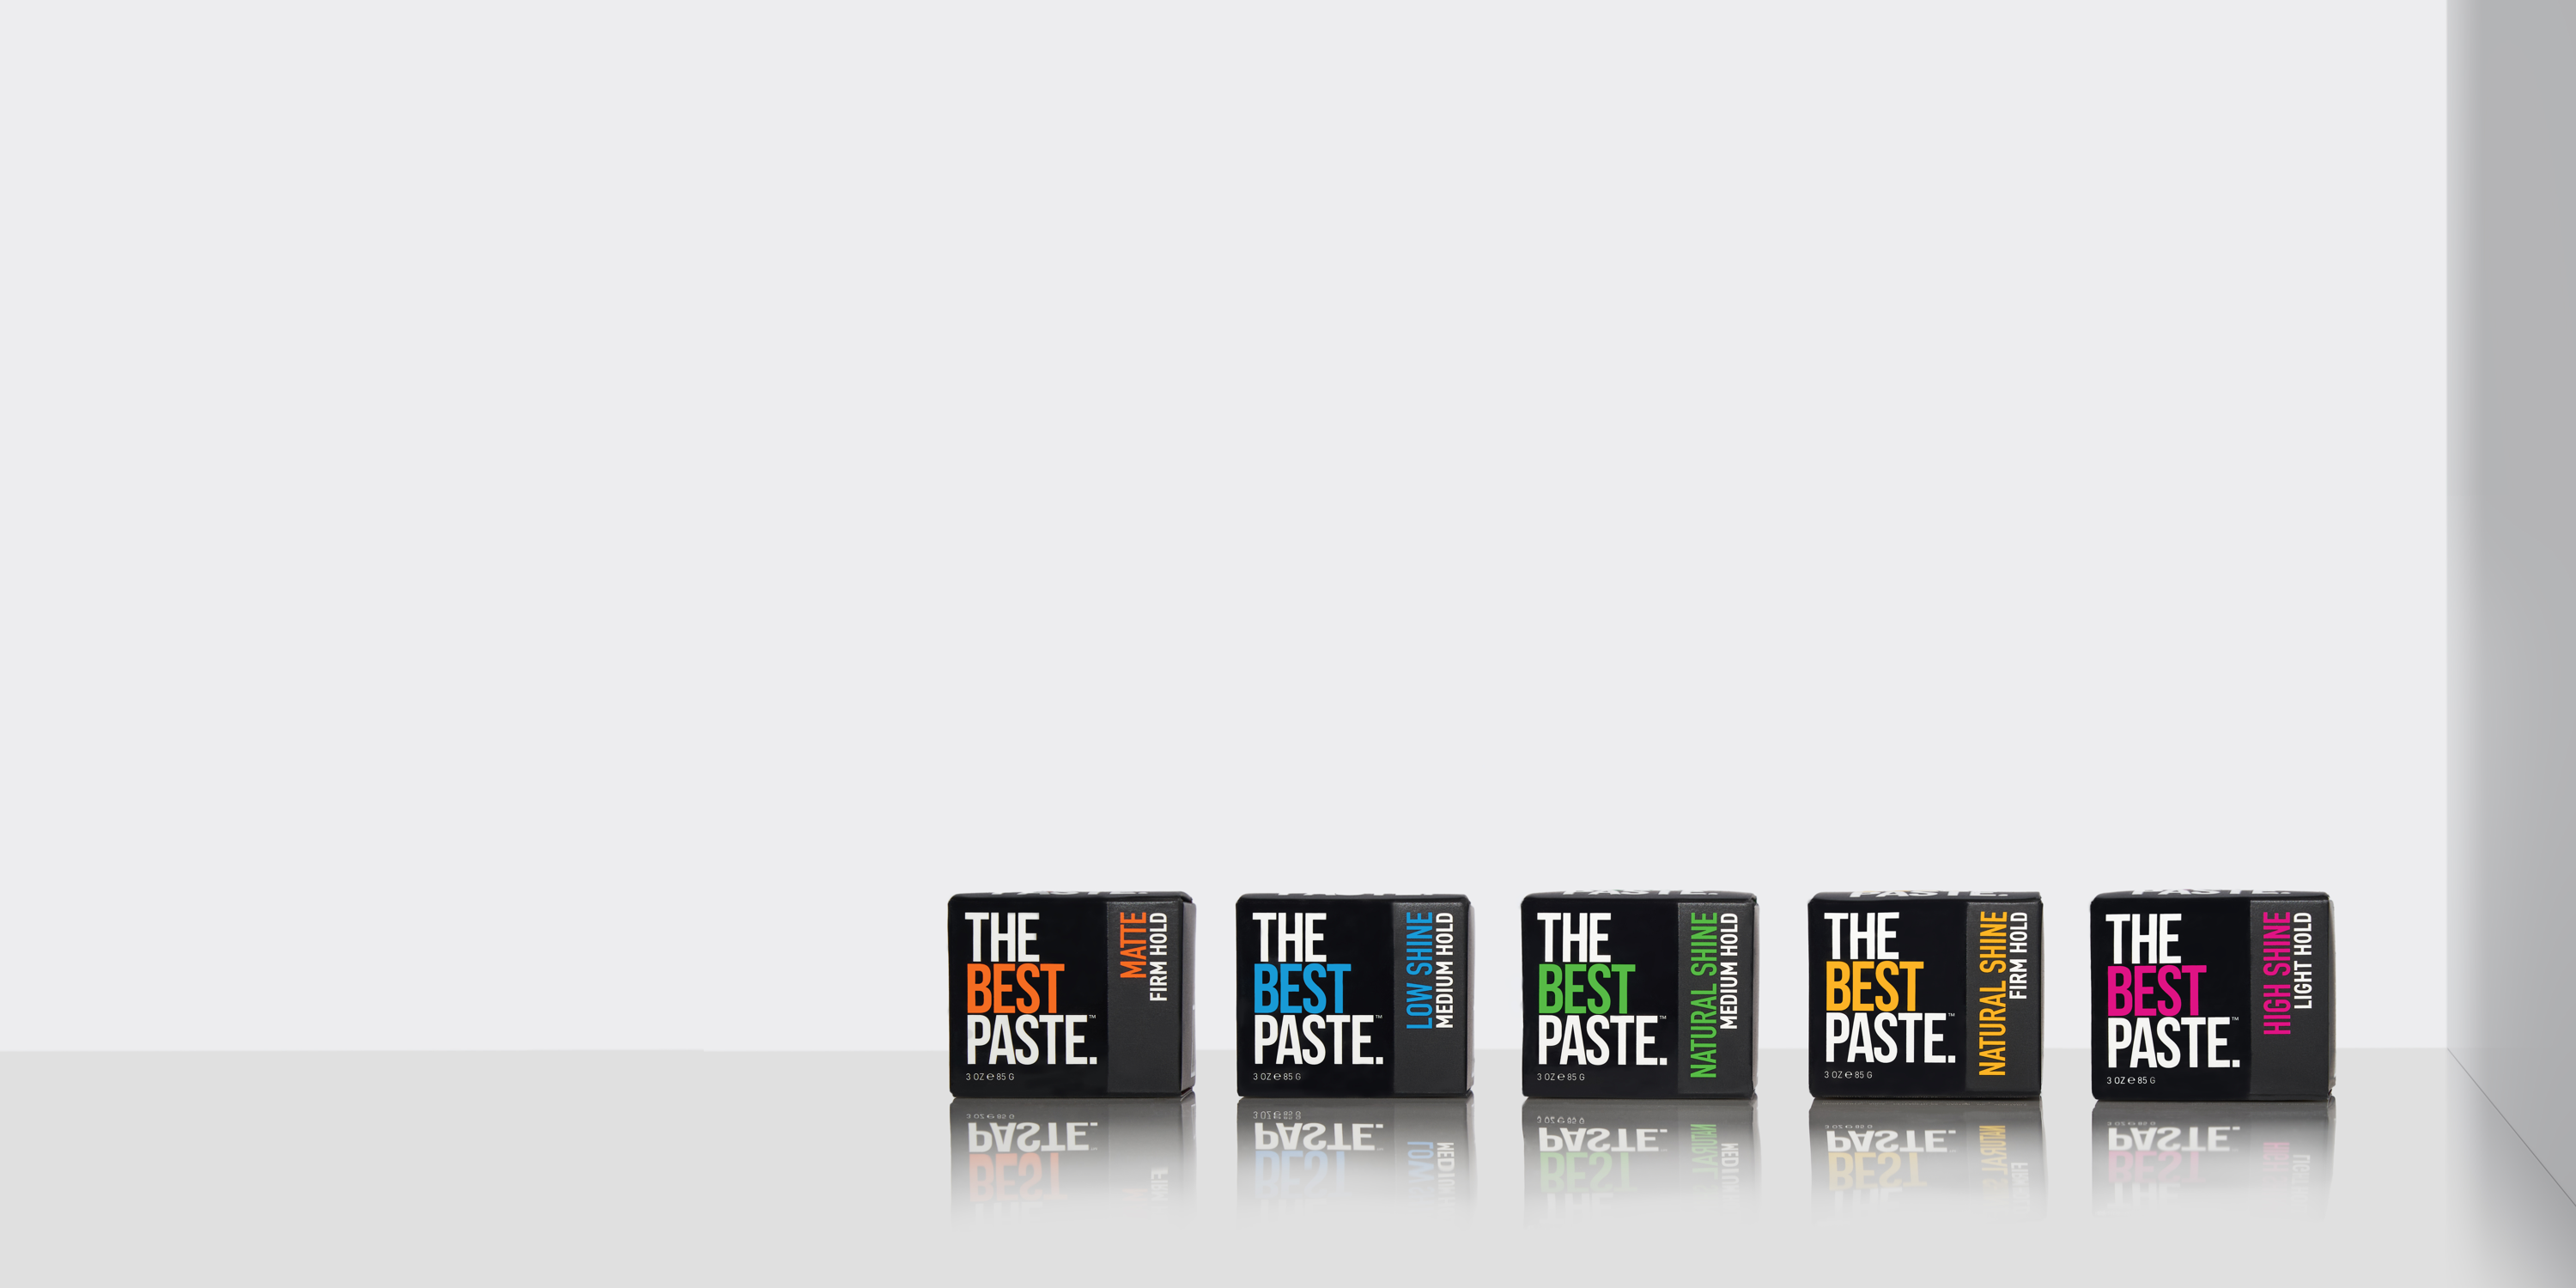 The Best Paste.™ – THE BEST PASTE.™